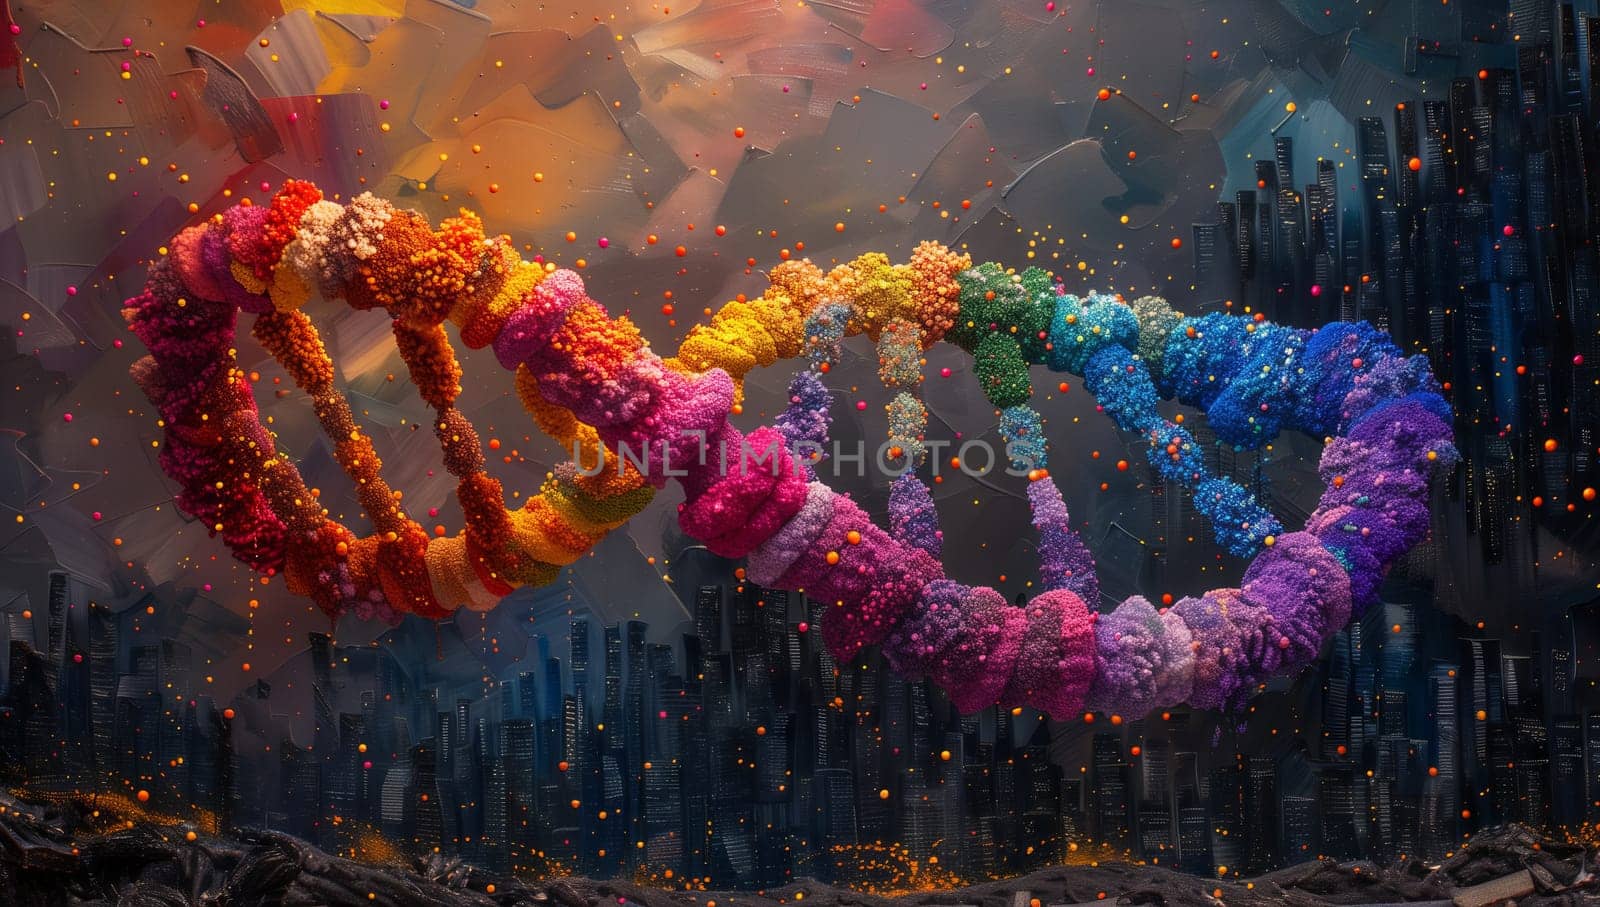 A colorful DNA molecule artwork with a crowd backdrop in magenta hues by richwolf